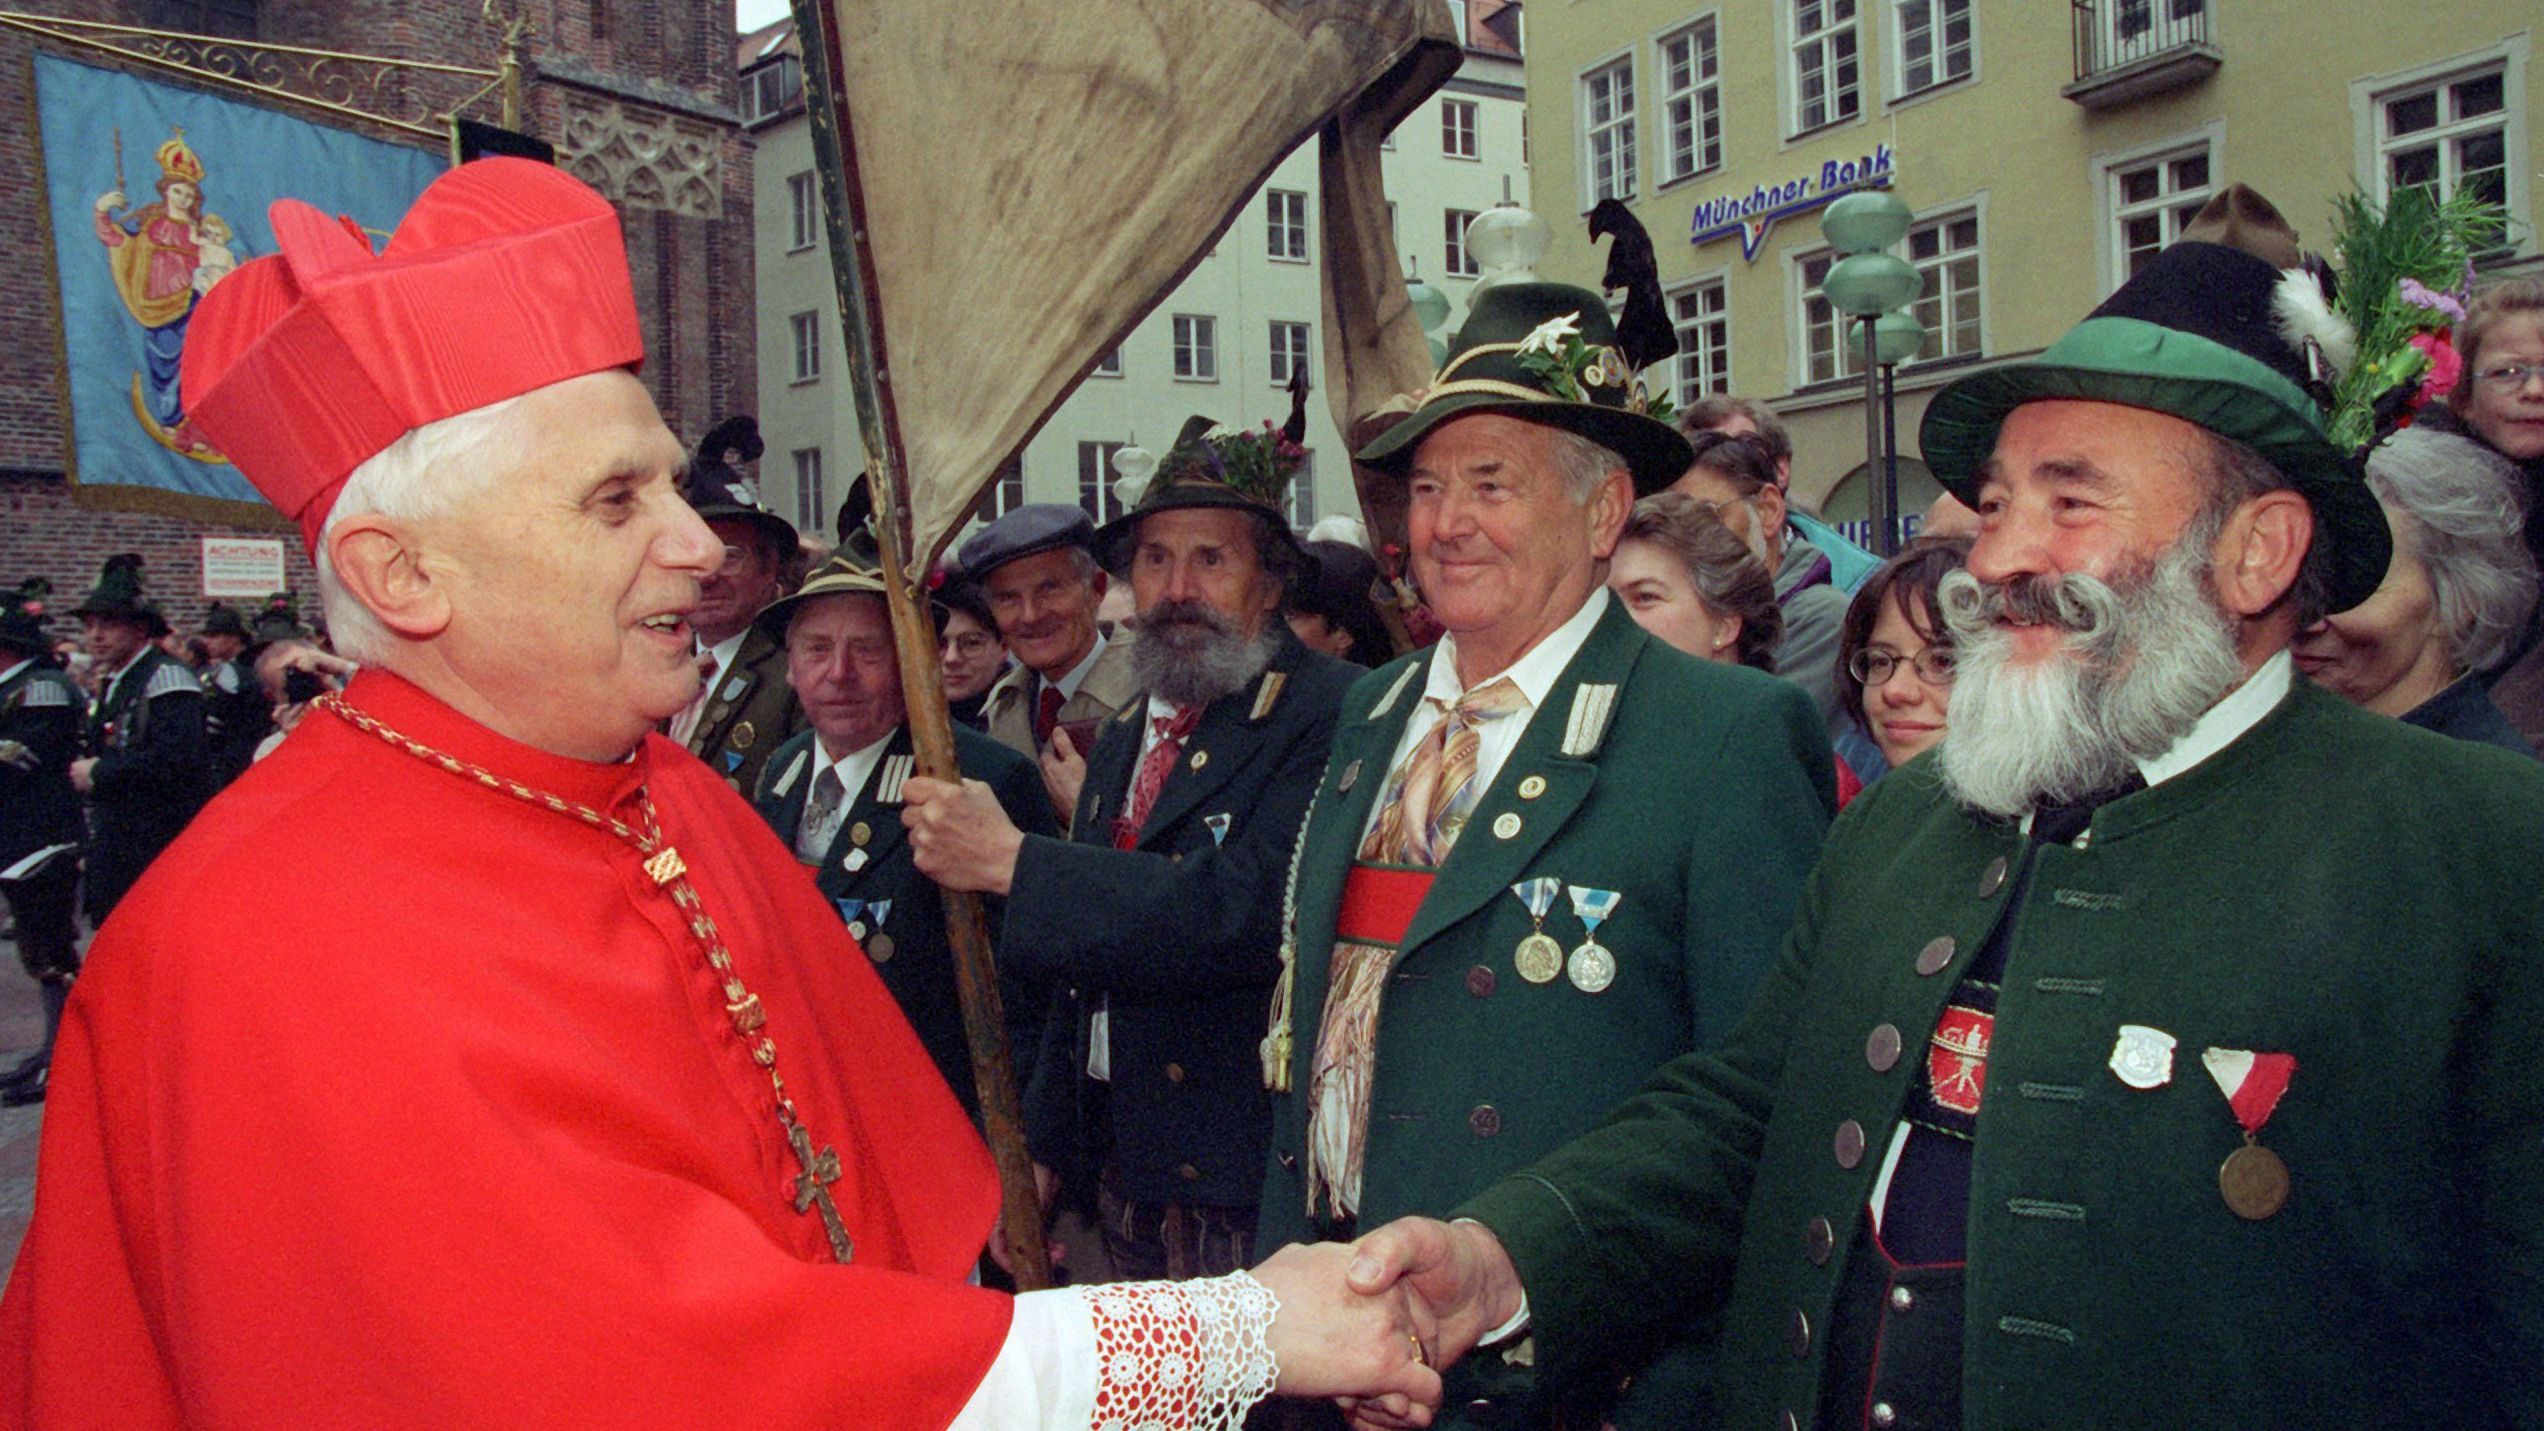 Benedict greets a mountain rifleman in Munich in 1997. Before that, he had celebrated the 20th anniversary of his episcopal consecration.